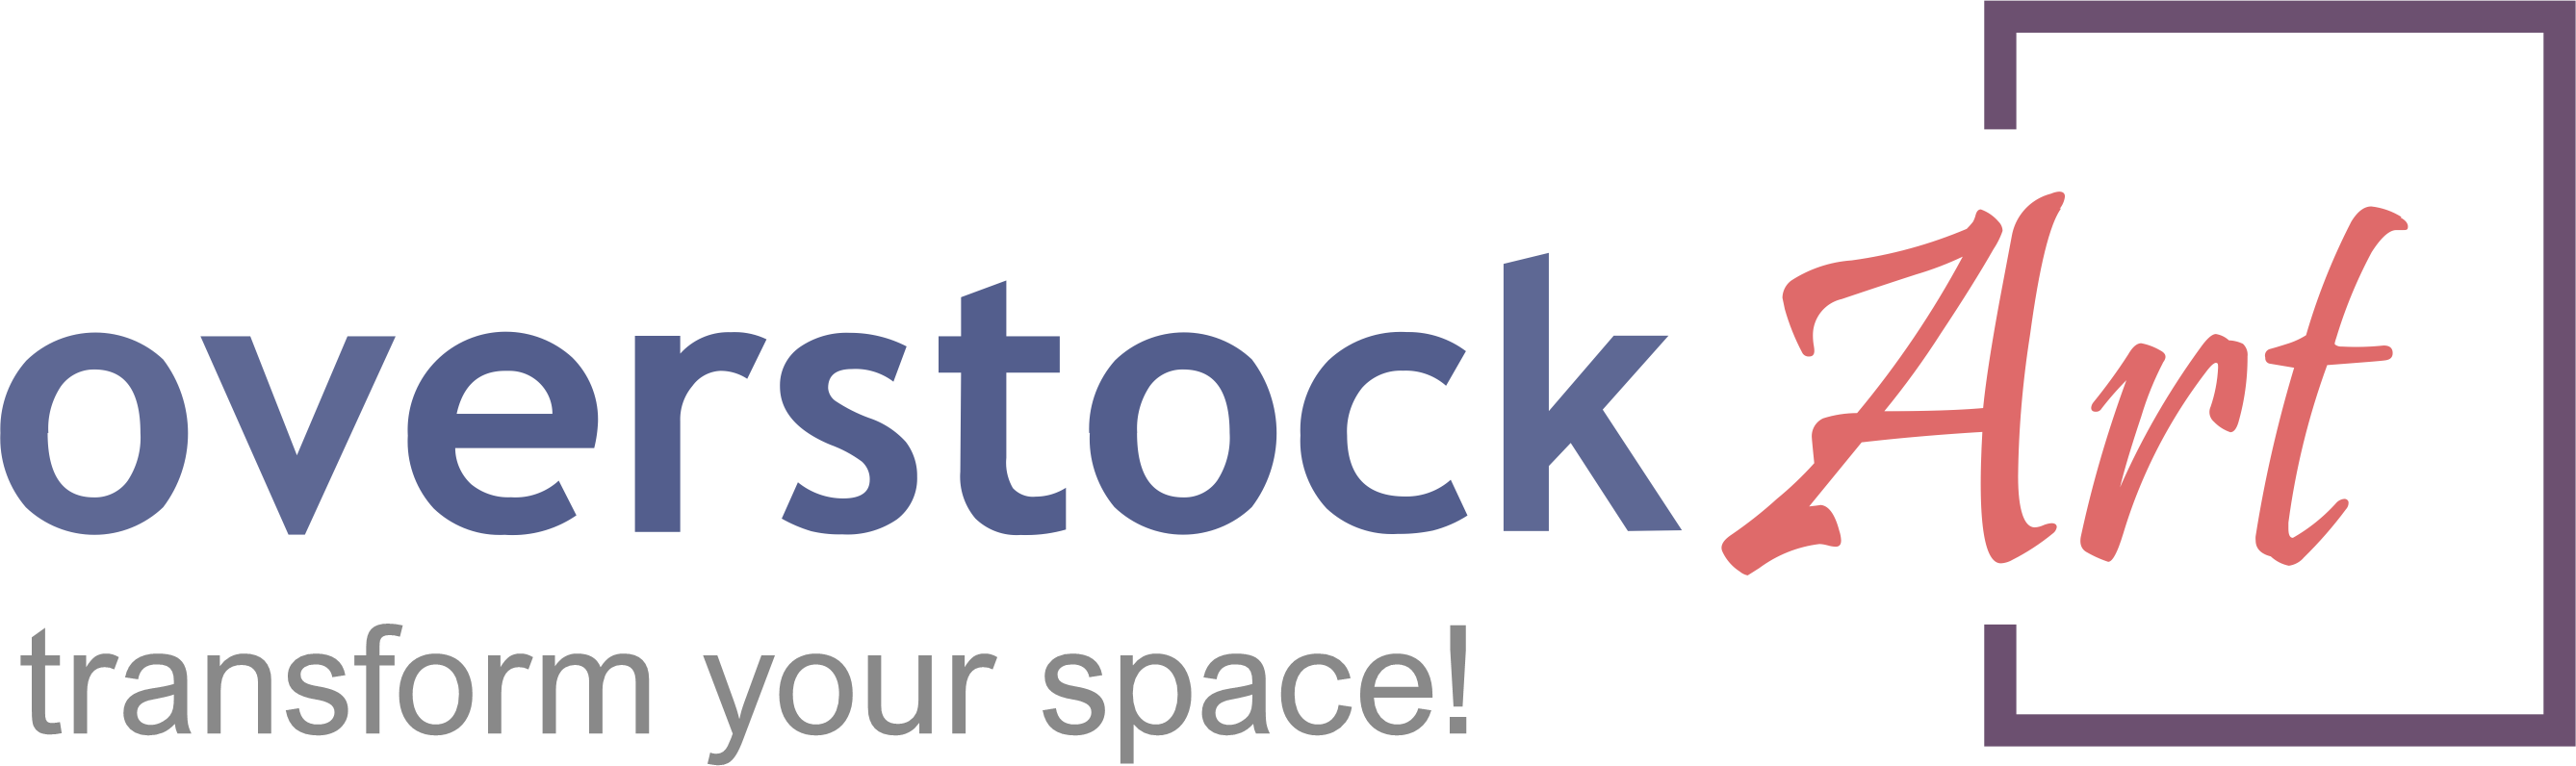 overstockArt.com Announces Relocation and Expansion to a New State of the Art Facility